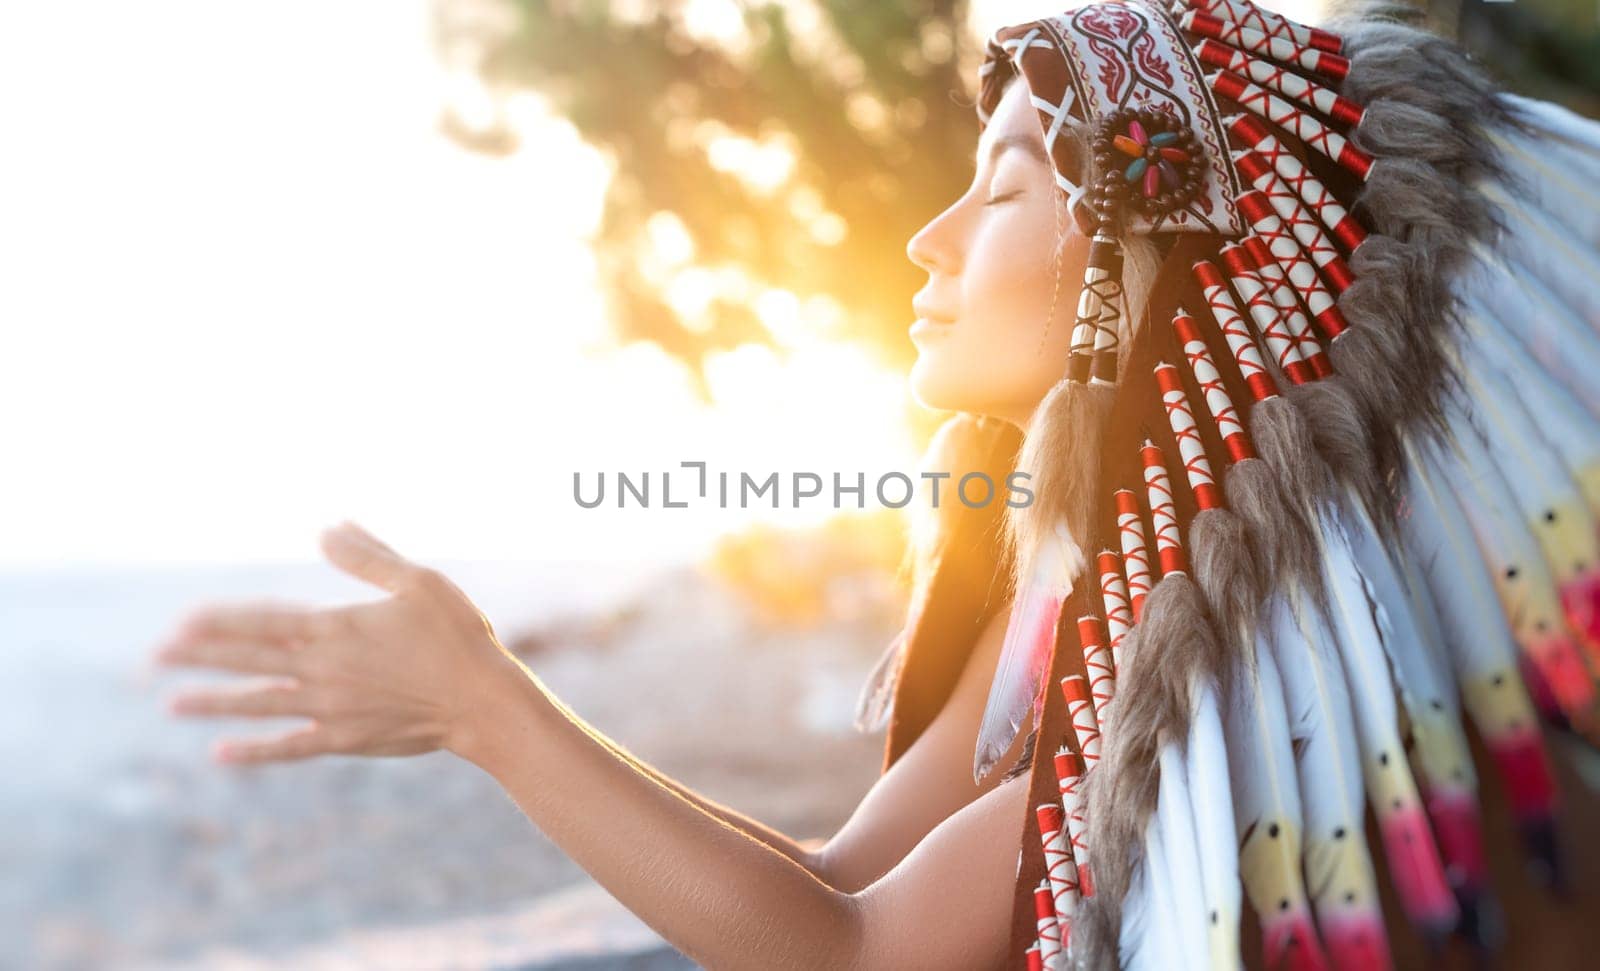 Portrait of girl with hands in Native American headdresses in nature in the sunset light by Rotozey